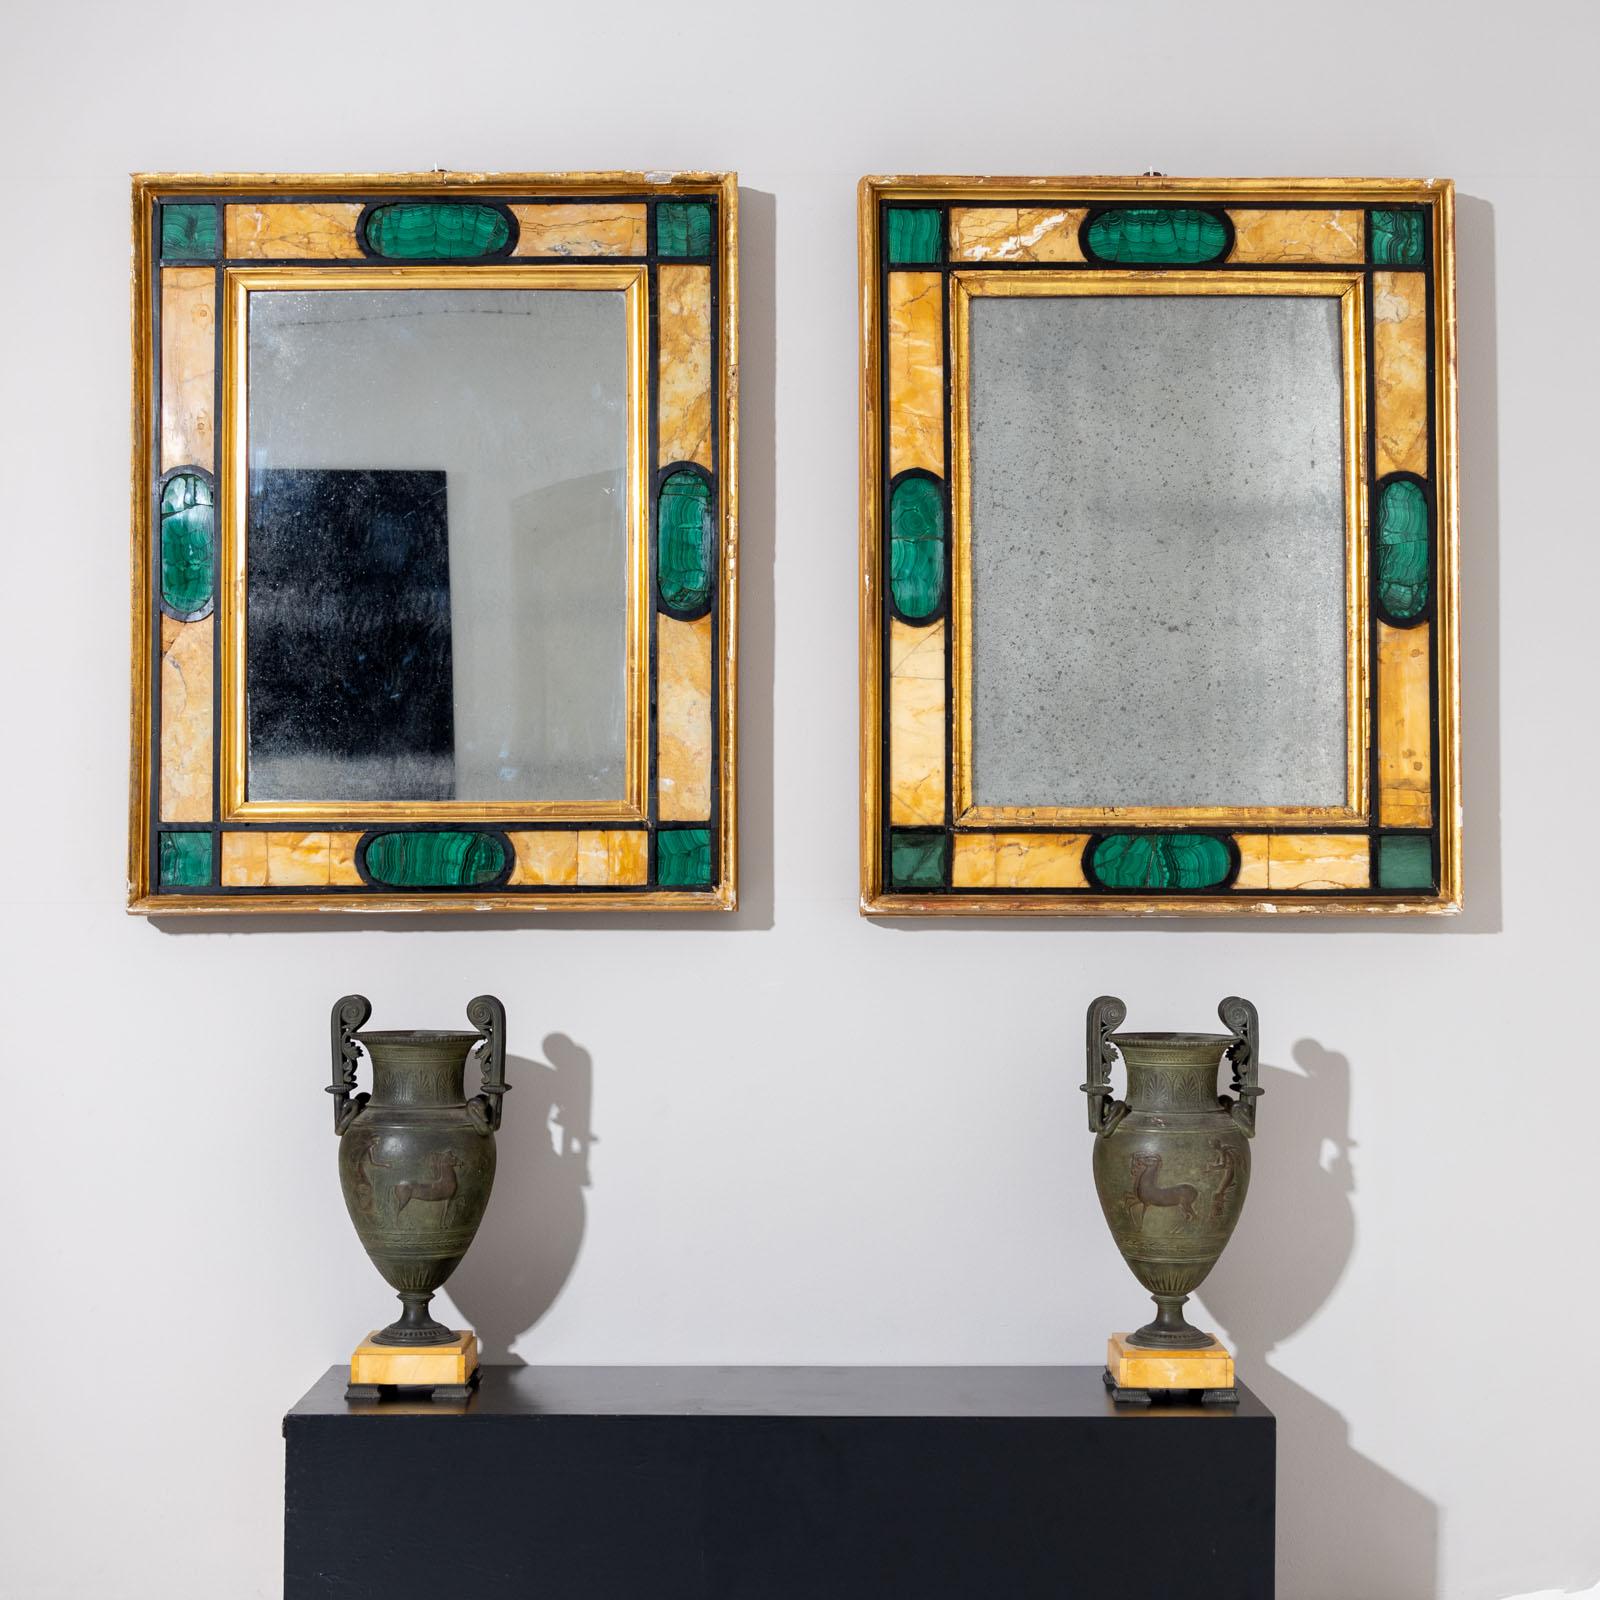 Pair of Wall Mirrors in Giallo Siena and Malachite, Italy 18th Century For Sale 4